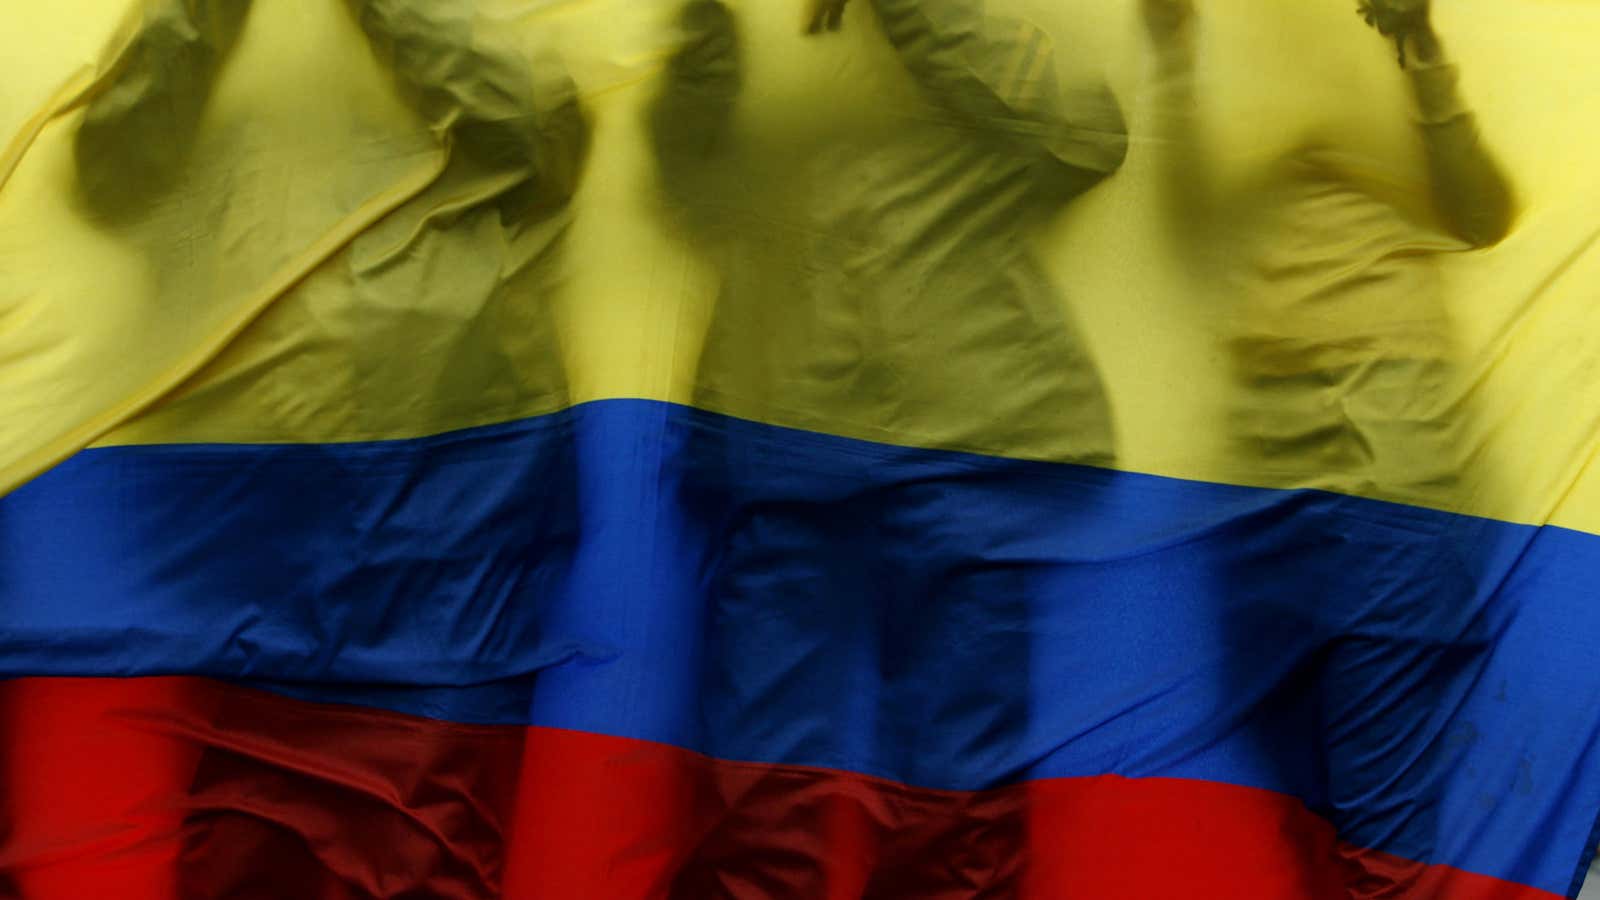 All sorts of tech companies have draped themselves in the Colombian flag.